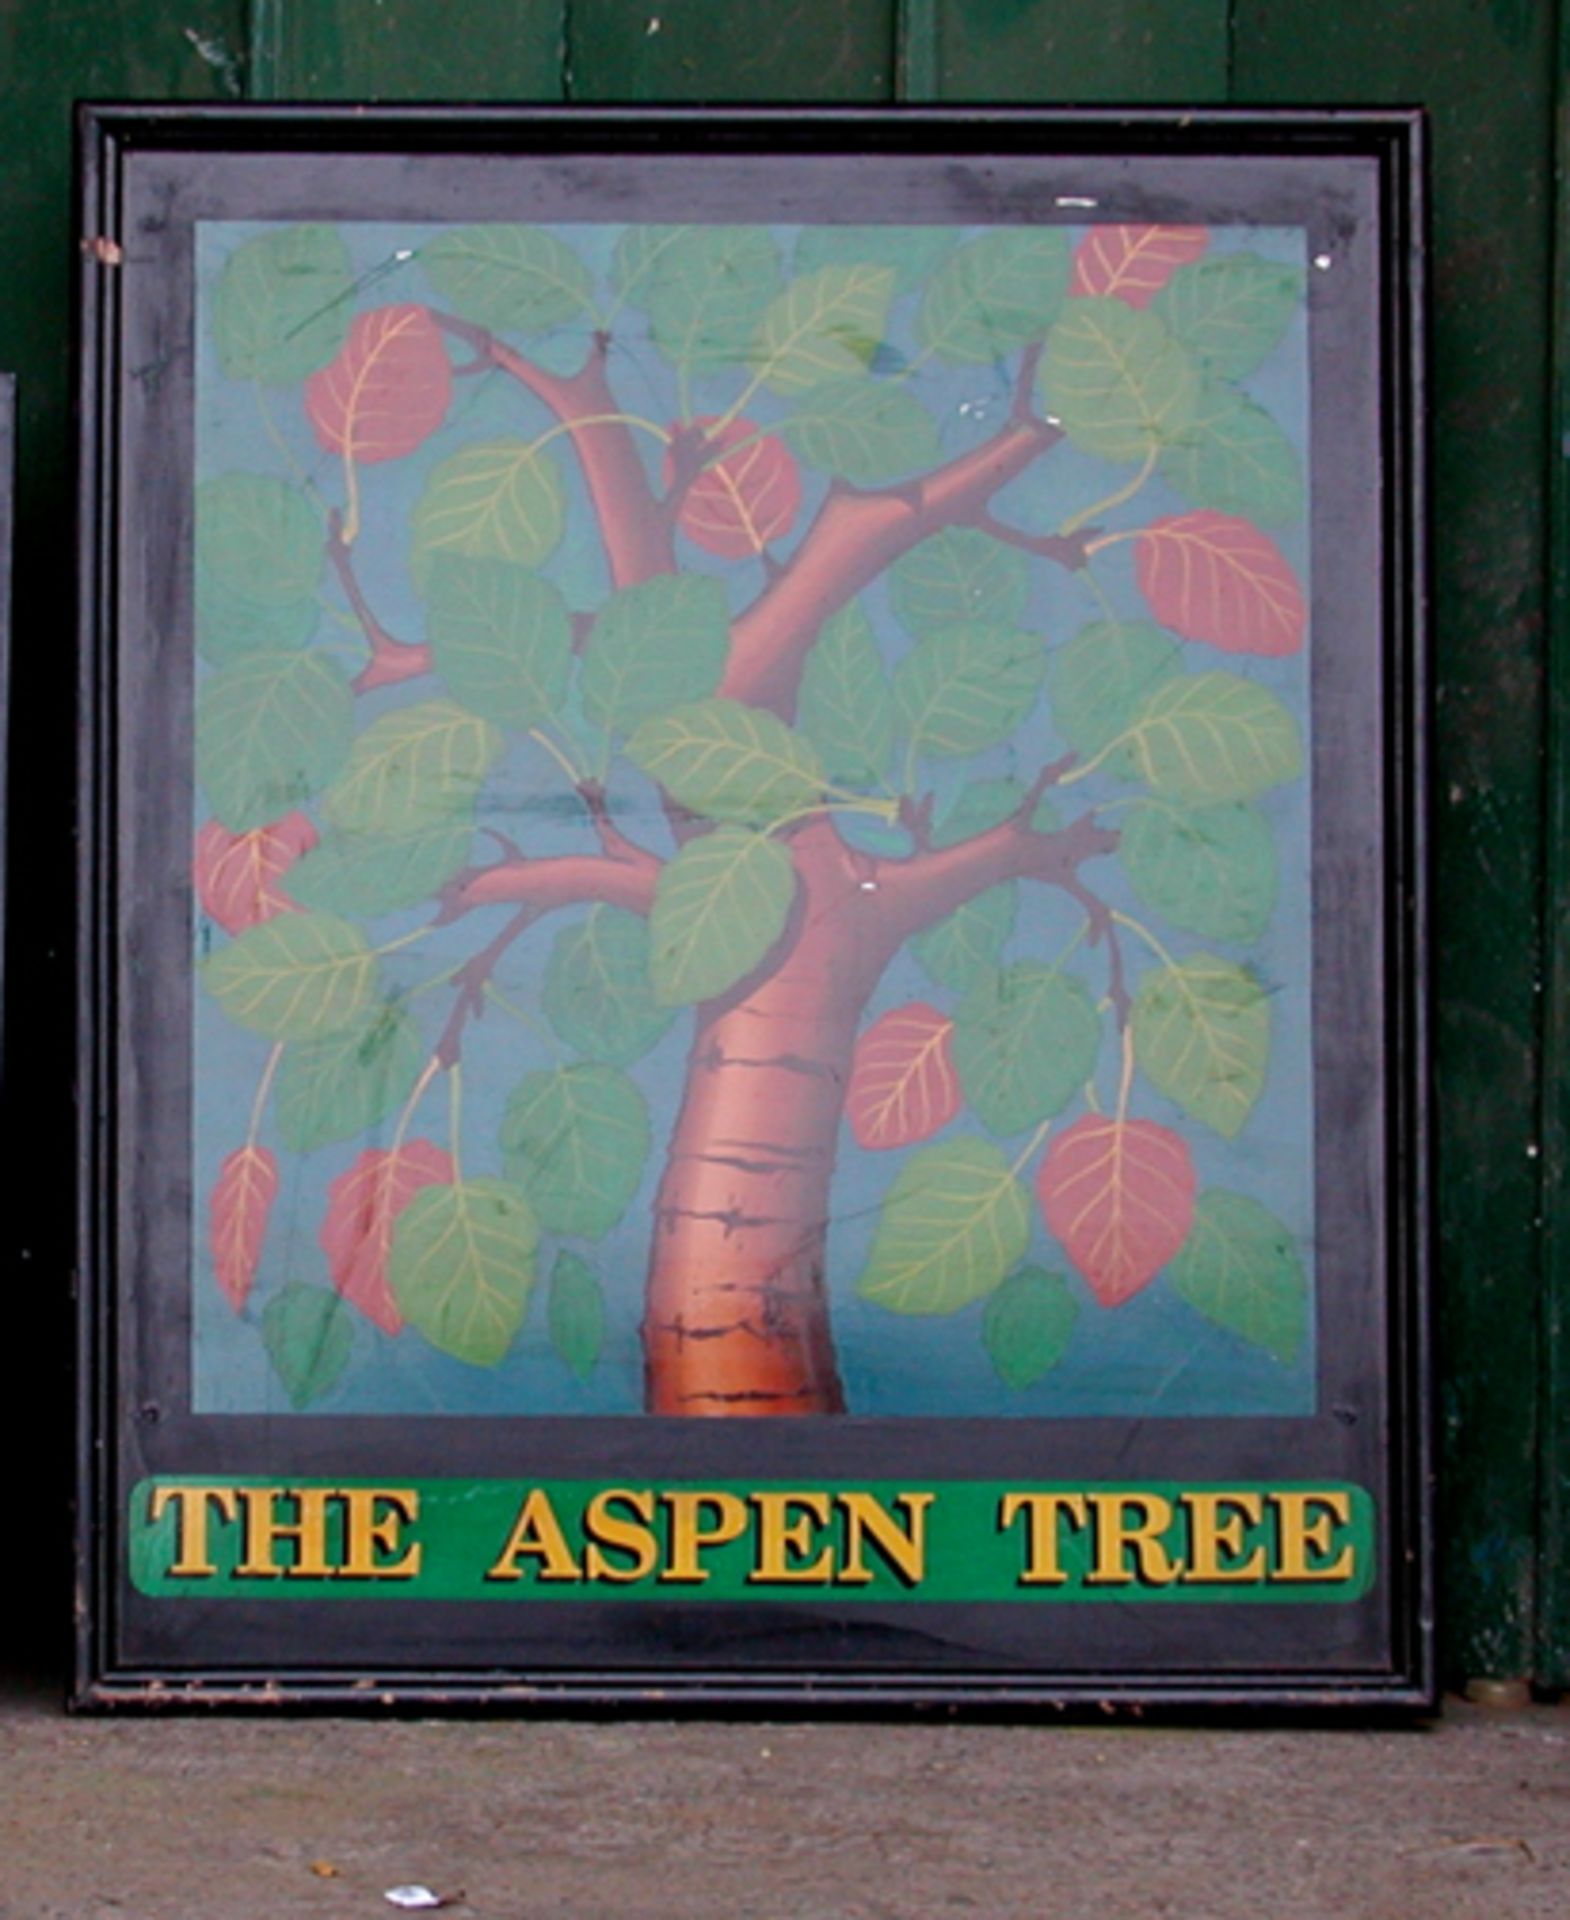 SINGLE SIDED 'THE ASPEN TREE' PUB SIGN, NEW FRAME. HEIGHT 970MM (38IN) X WIDTH 815MM (32IN) X DEPTH